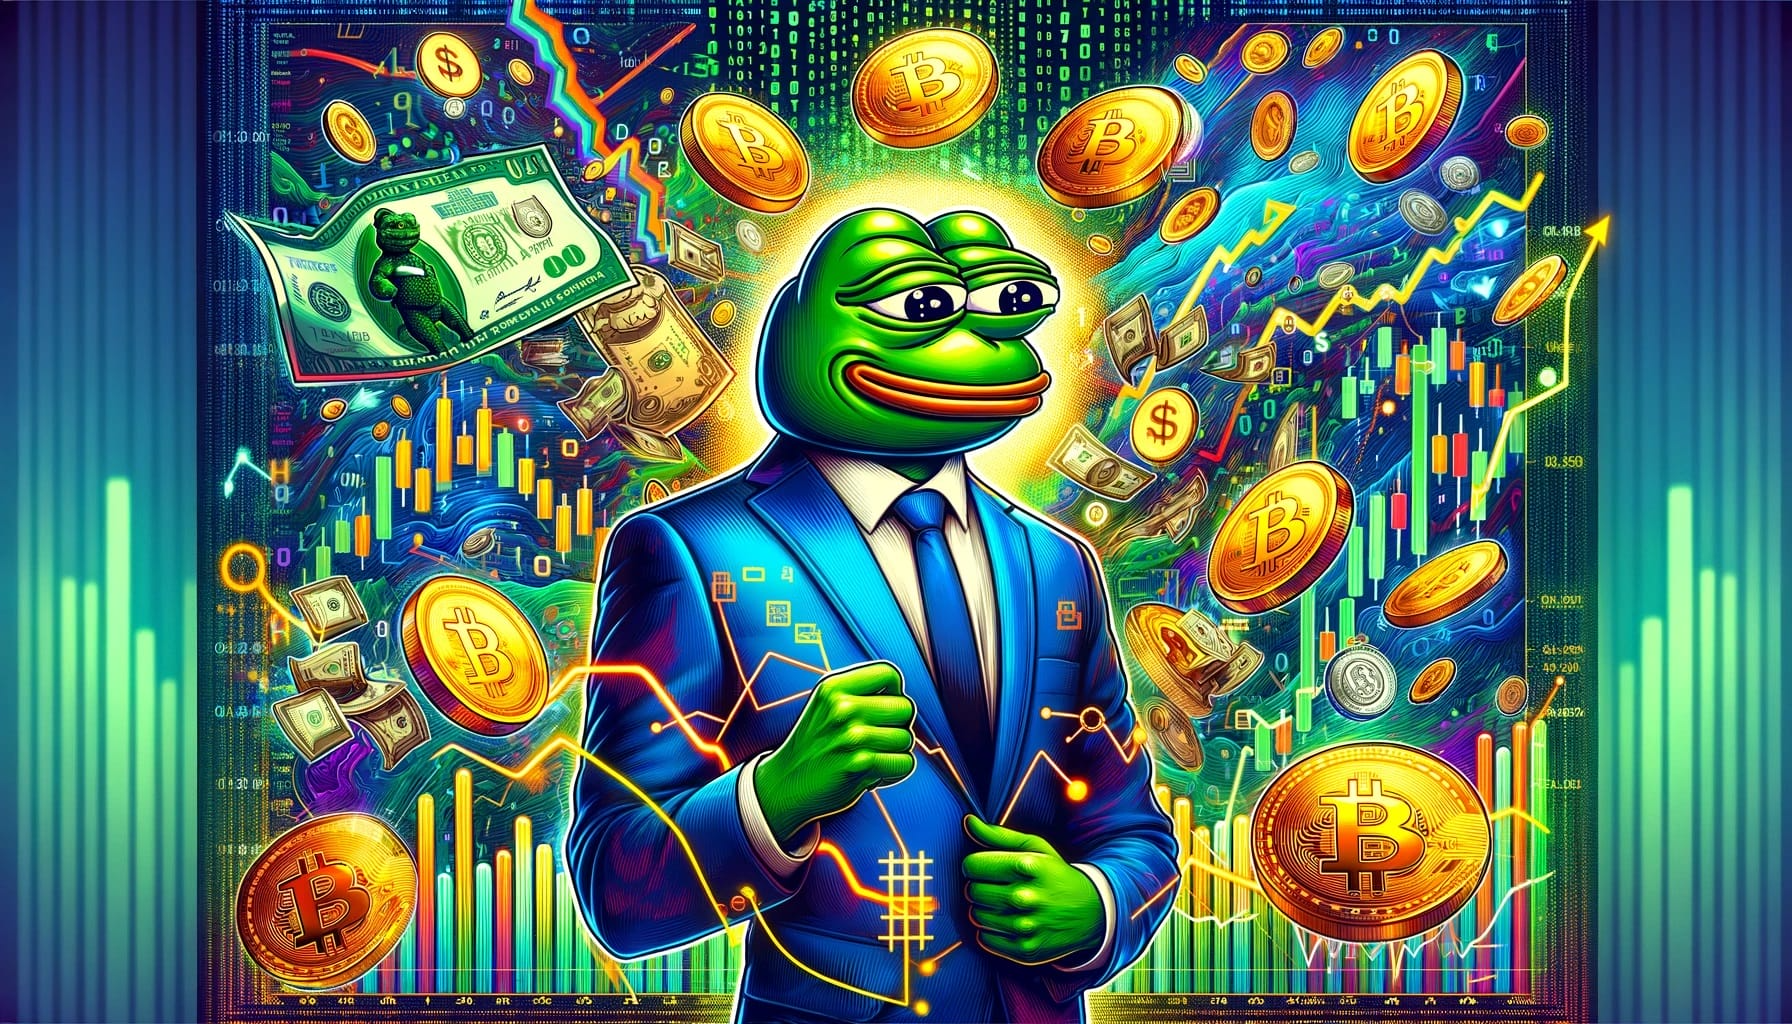 Pepe Price Prediction: PEPE Plunges 5% As This Potential BONK Challenger Teases A New Exchange Listing